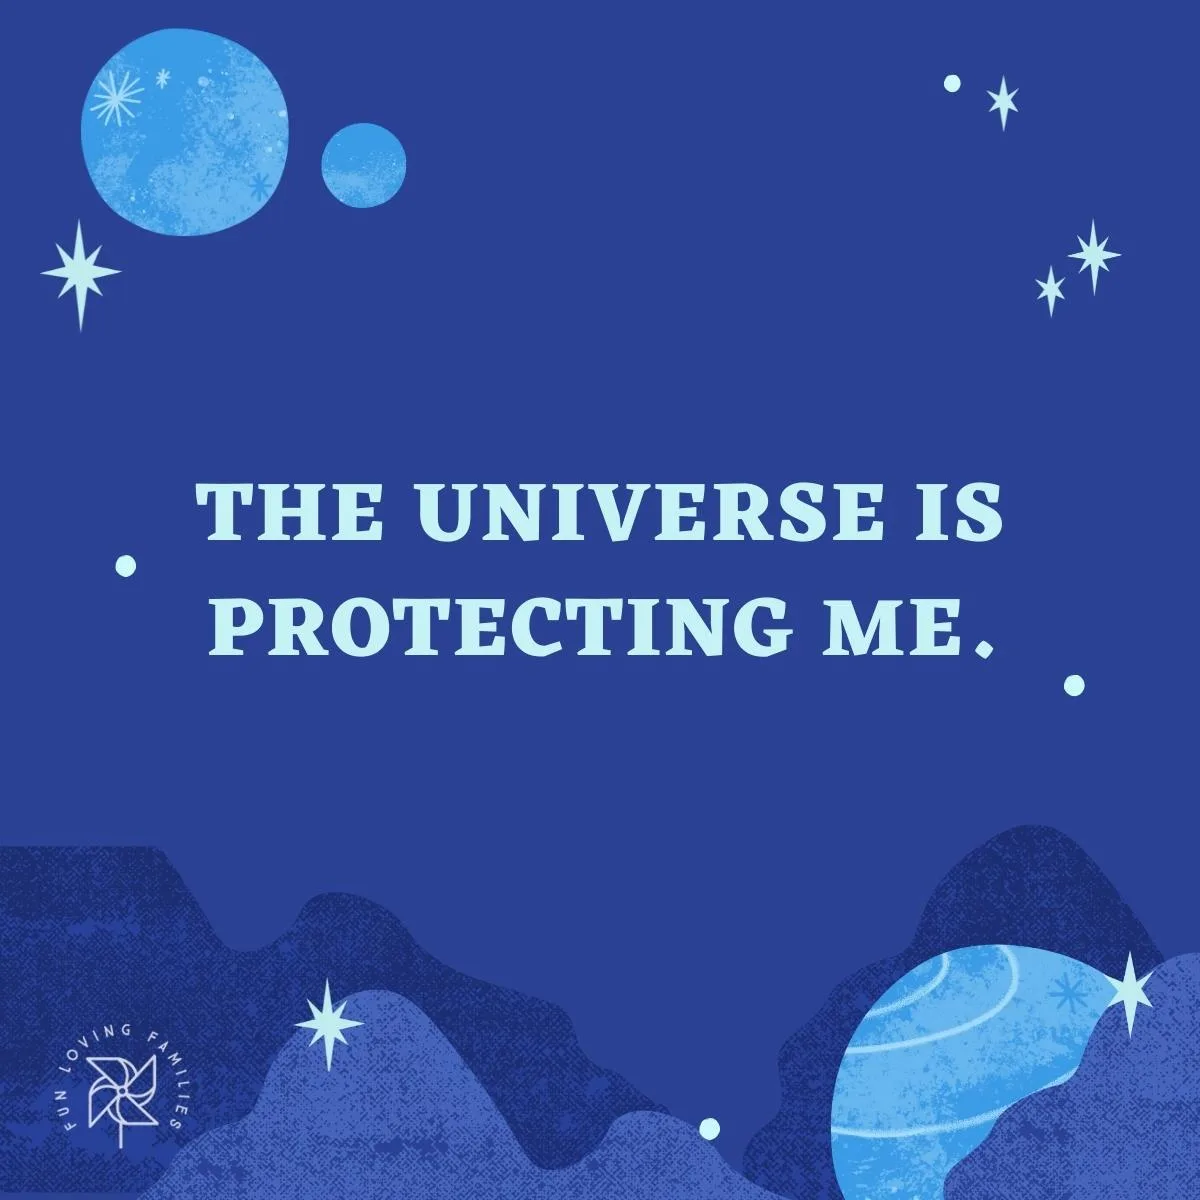 The universe is protecting me affirmations